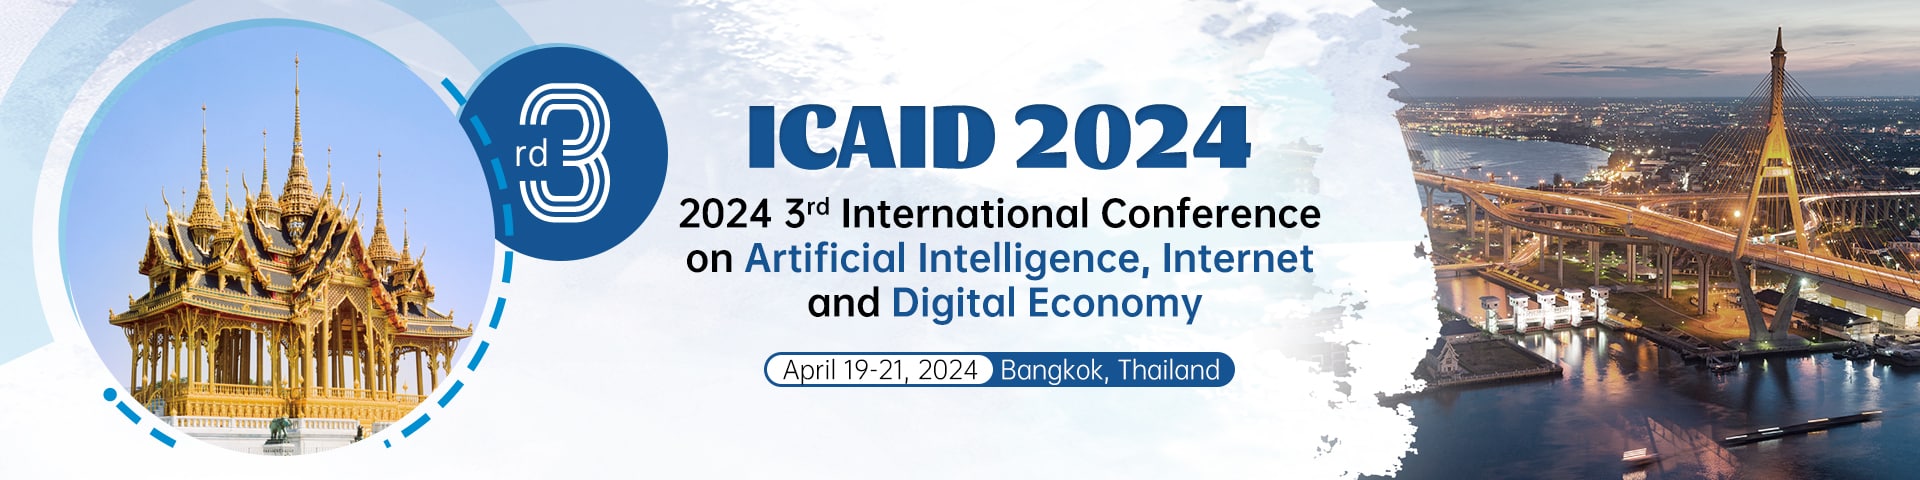 2024 3rd International Conference on Artificial Intelligence, Internet and Digital Economy (ICAID 2024)